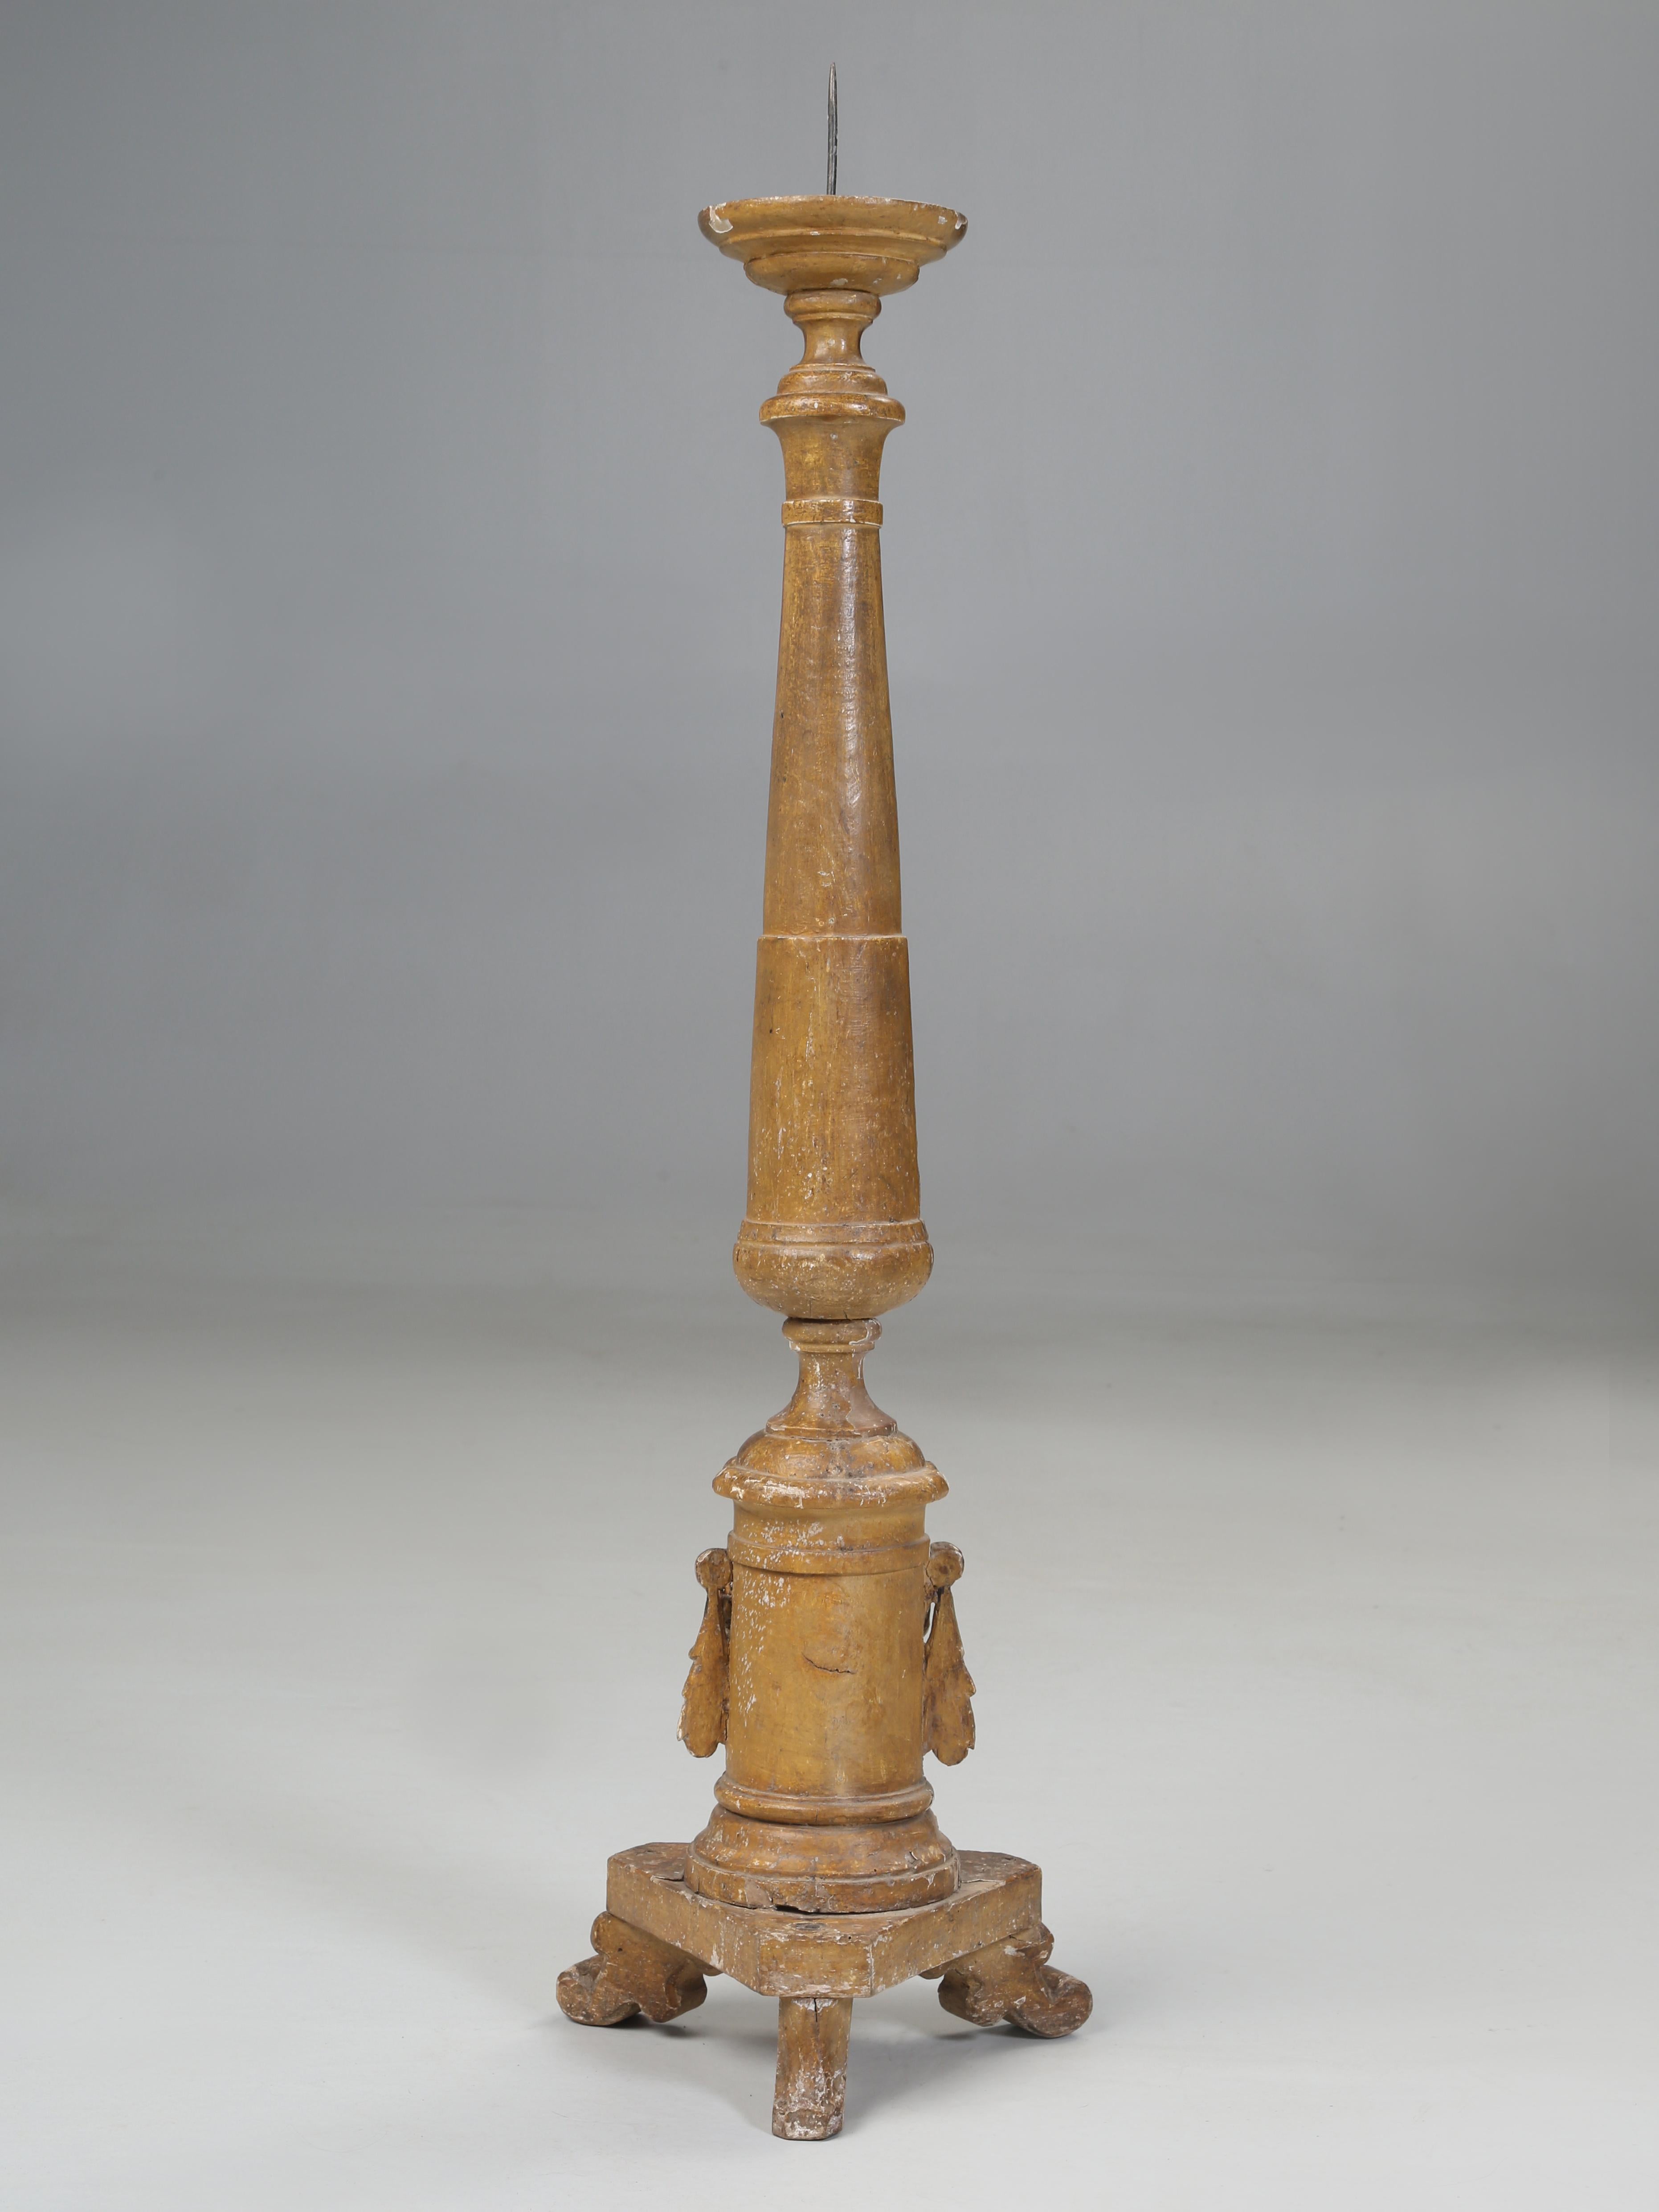 Italian Gilded Altar Candlestick Completely Original and Unrestored c1780-1820 For Sale 6